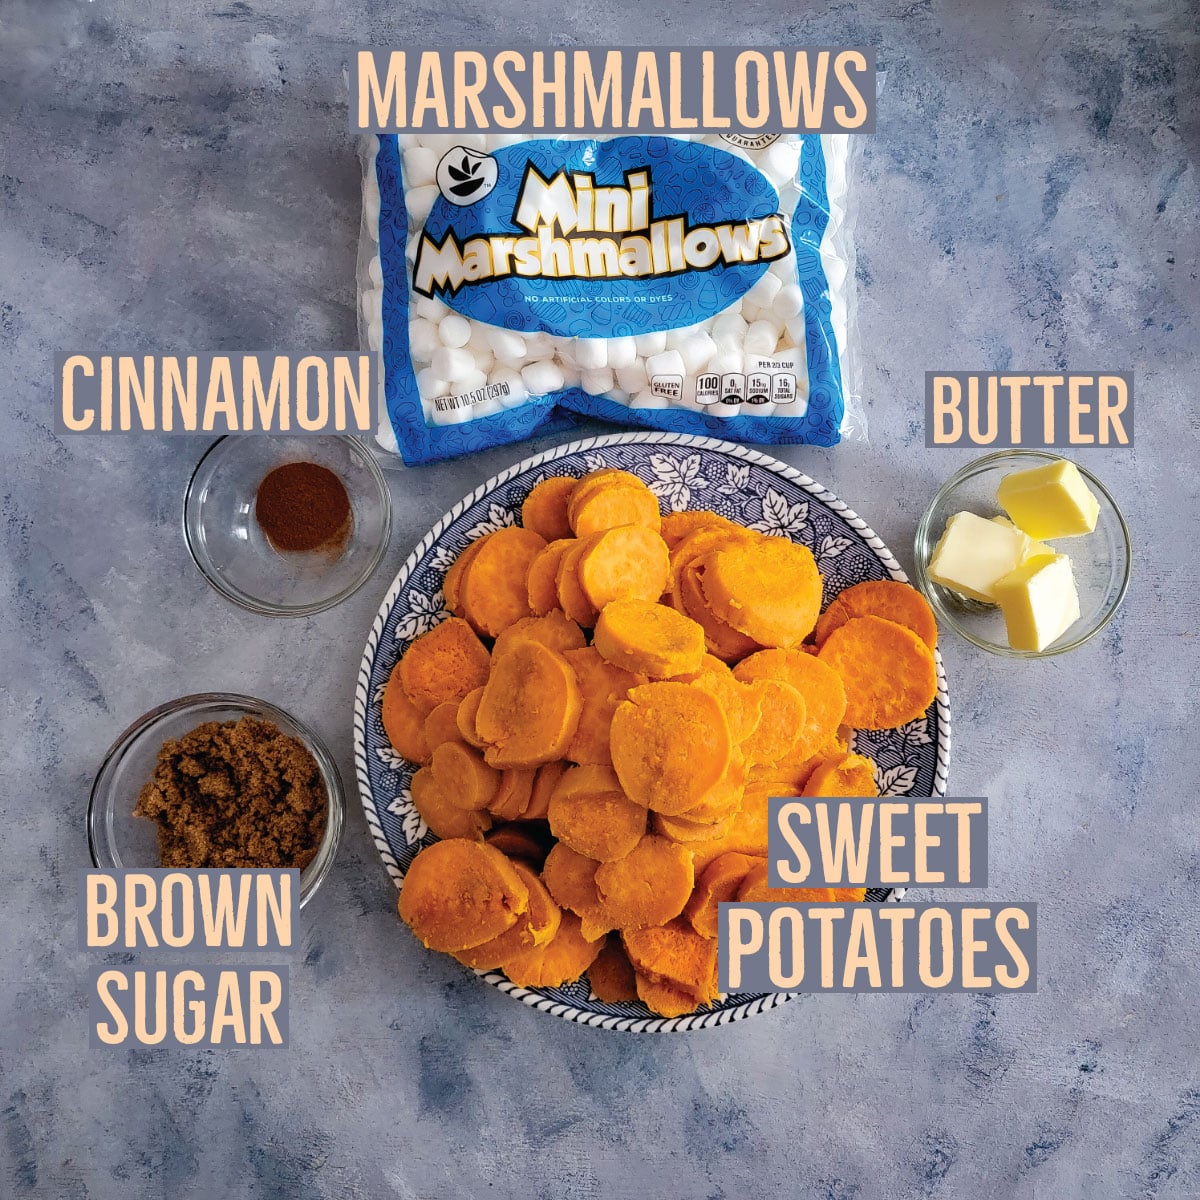 Ingredients prepped - sweet potatoes, butter, brown sugar, cinnamon and marshmallows.